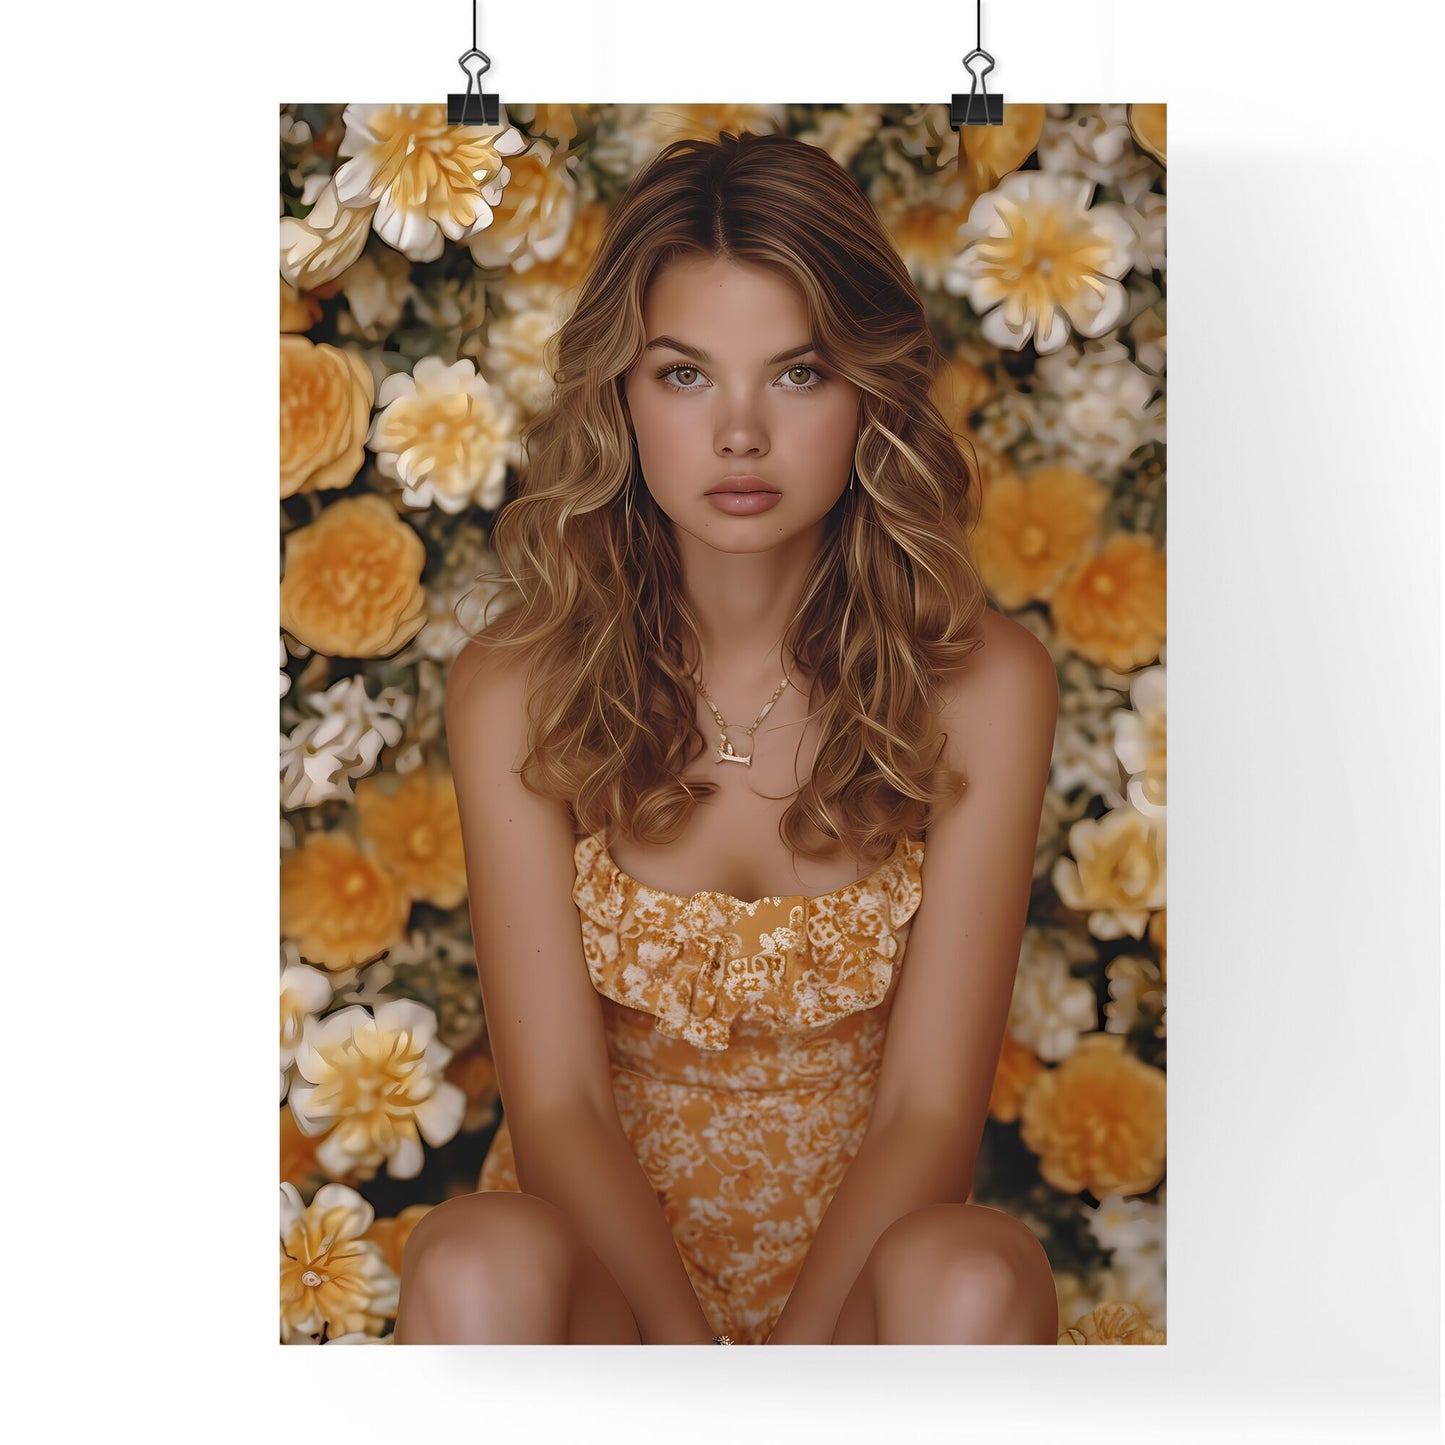 Deep Sea fisherman Rachel Welch - Art print of a woman sitting in front of a wall of flowers Default Title